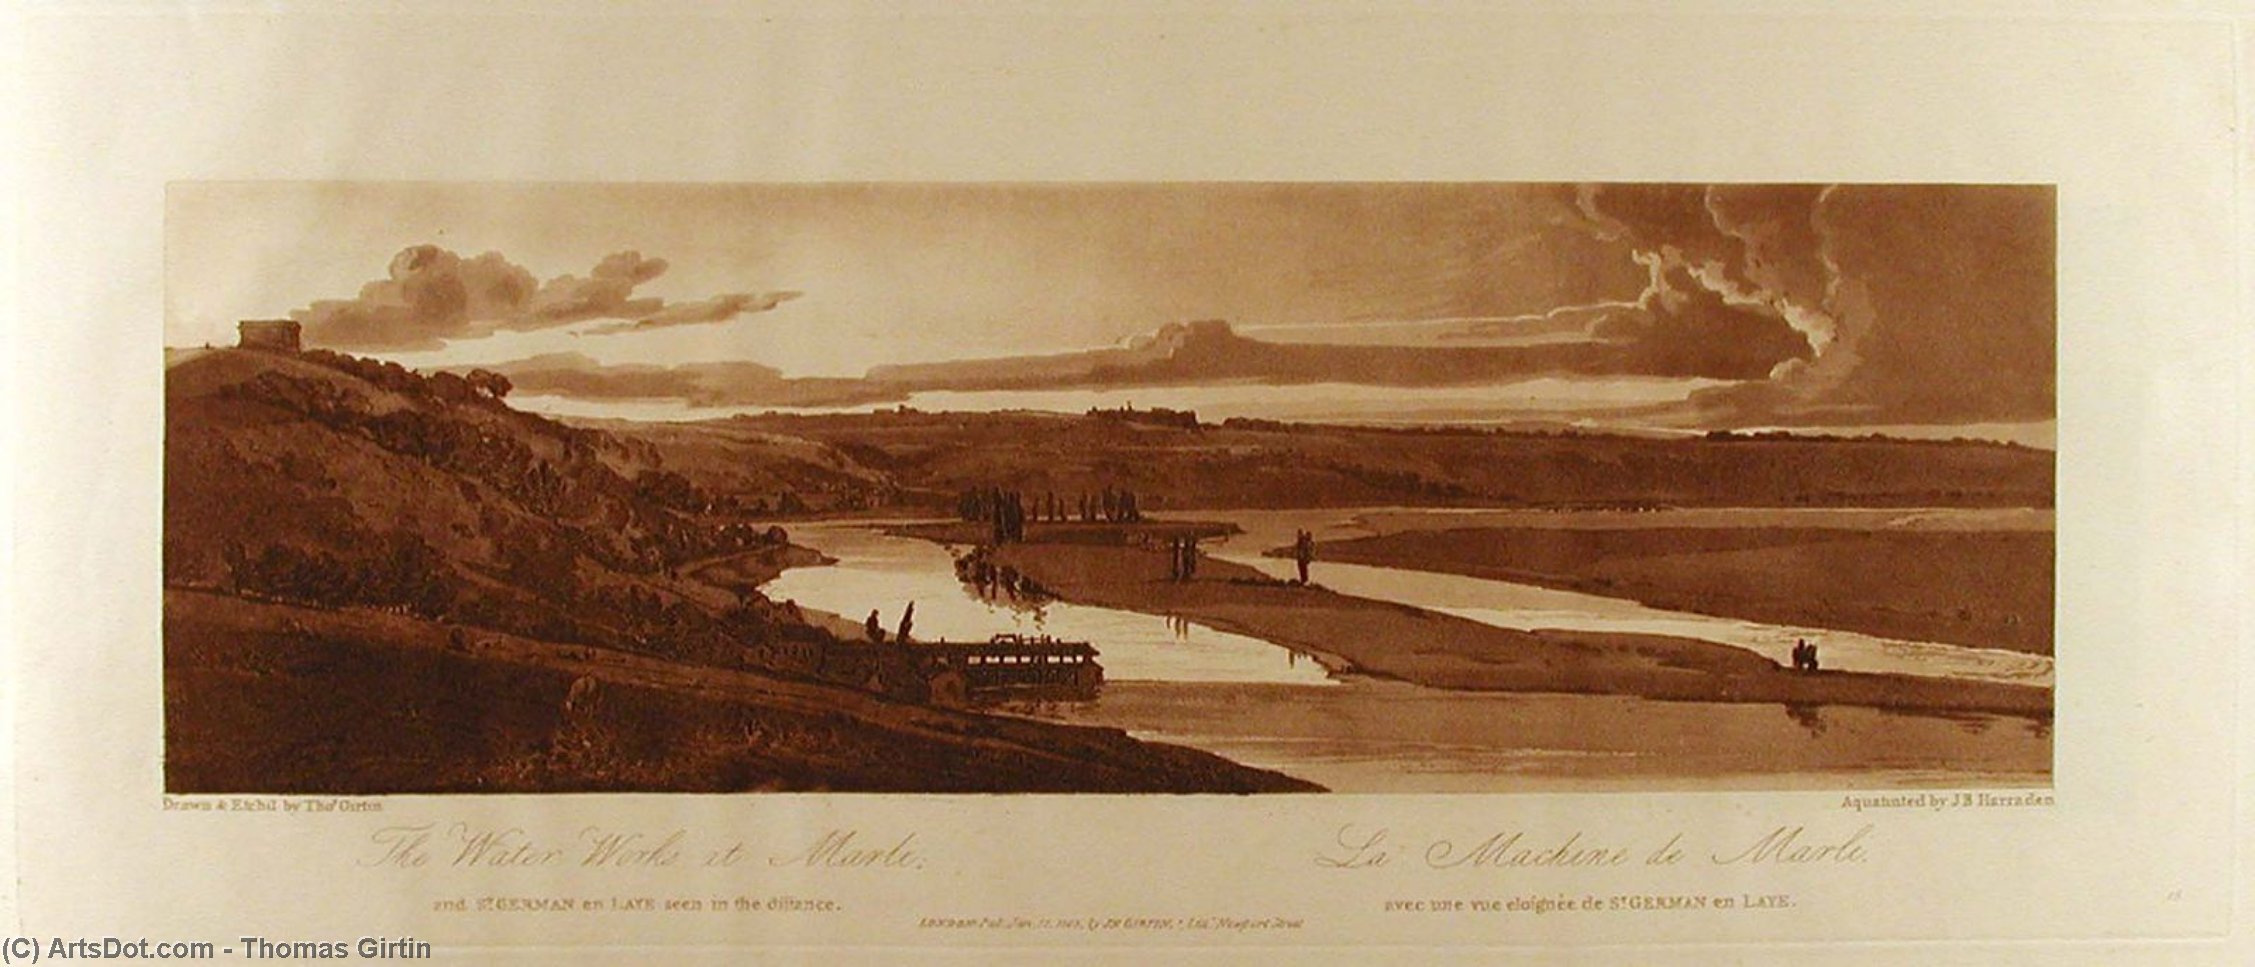 Buy Museum Art Reproductions The Water Works at Marli and St. Germain en Laye Seen in the Distance by Thomas Girtin (1775-1802, United Kingdom) | ArtsDot.com